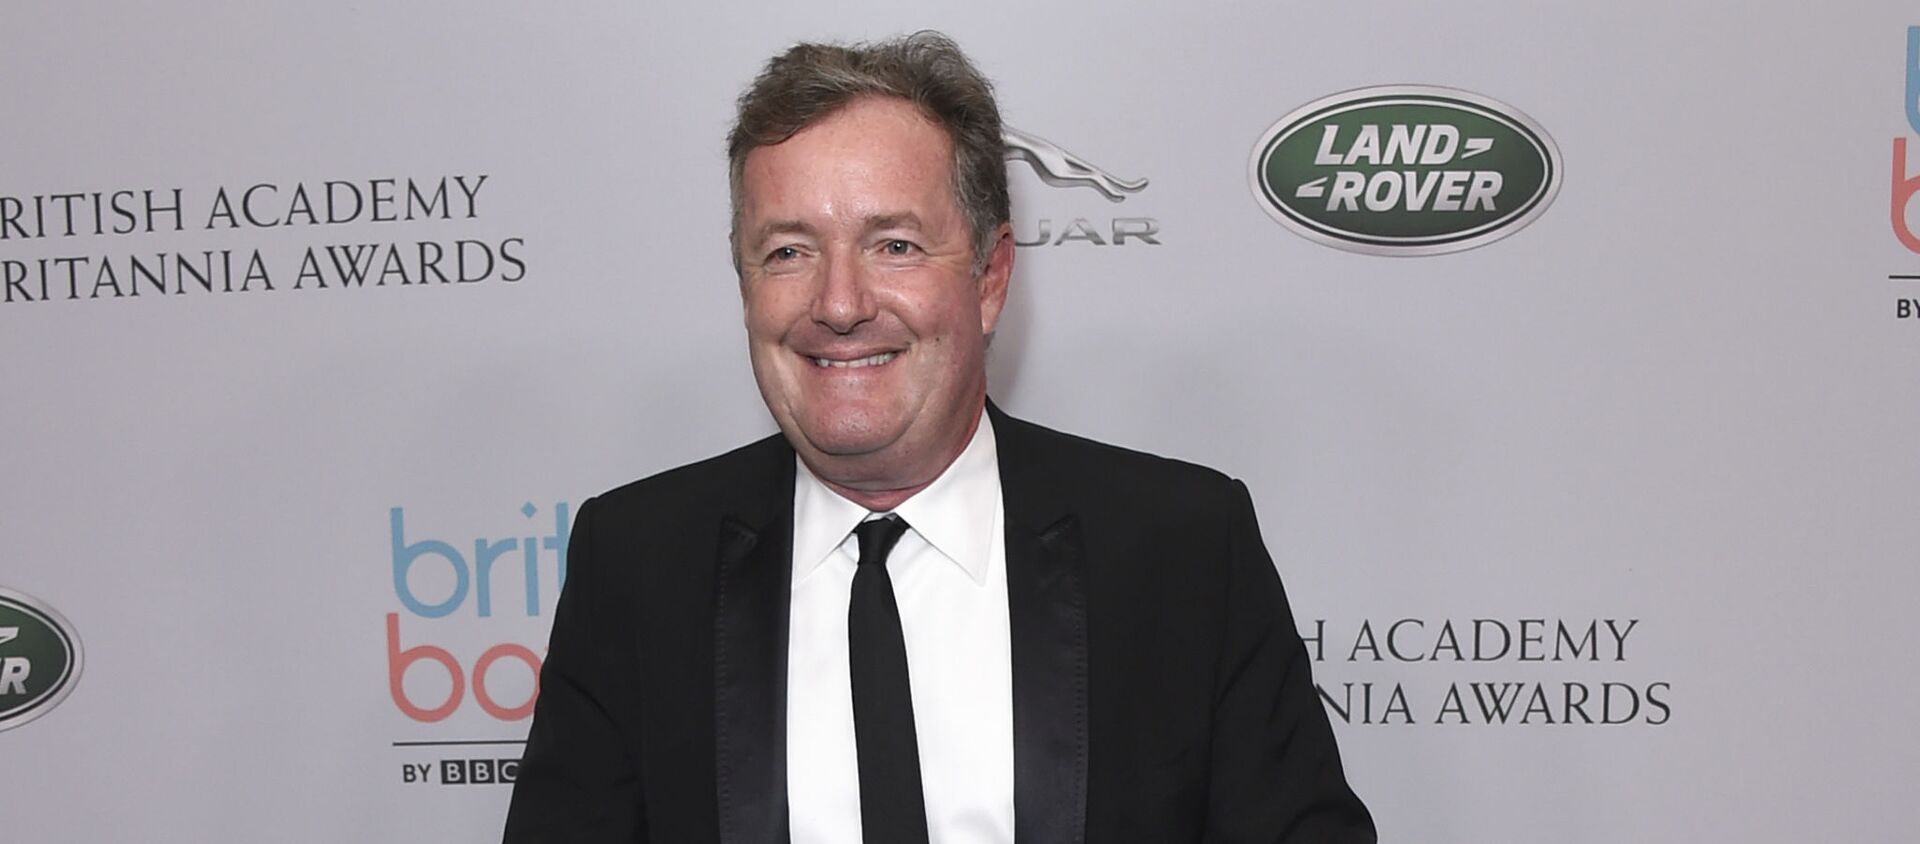 Piers Morgan arrives at the BAFTA Los Angeles Britannia Awards at the Beverly Hilton Hotel on Friday, Oct. 25, 2019, in Beverly Hills, Calif - Sputnik International, 1920, 10.07.2021